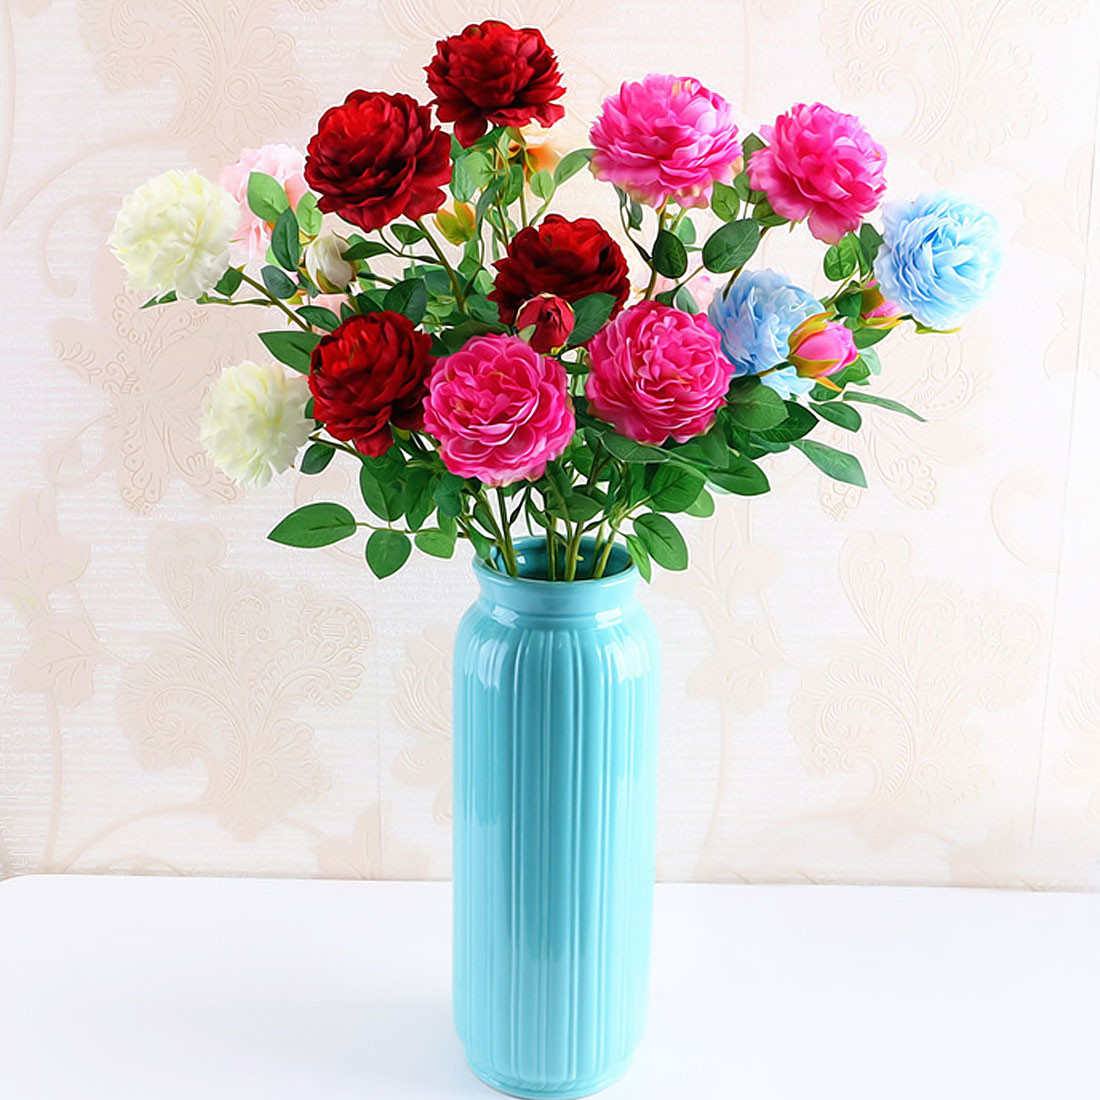 16 Best Sunflower Ceramic Vase 2024 free download sunflower ceramic vase of aliexpress com buy peony flowers 2018 1pc valentines day 3 head pertaining to aliexpress com buy peony flowers 2018 1pc valentines day 3 head flowers branch home de